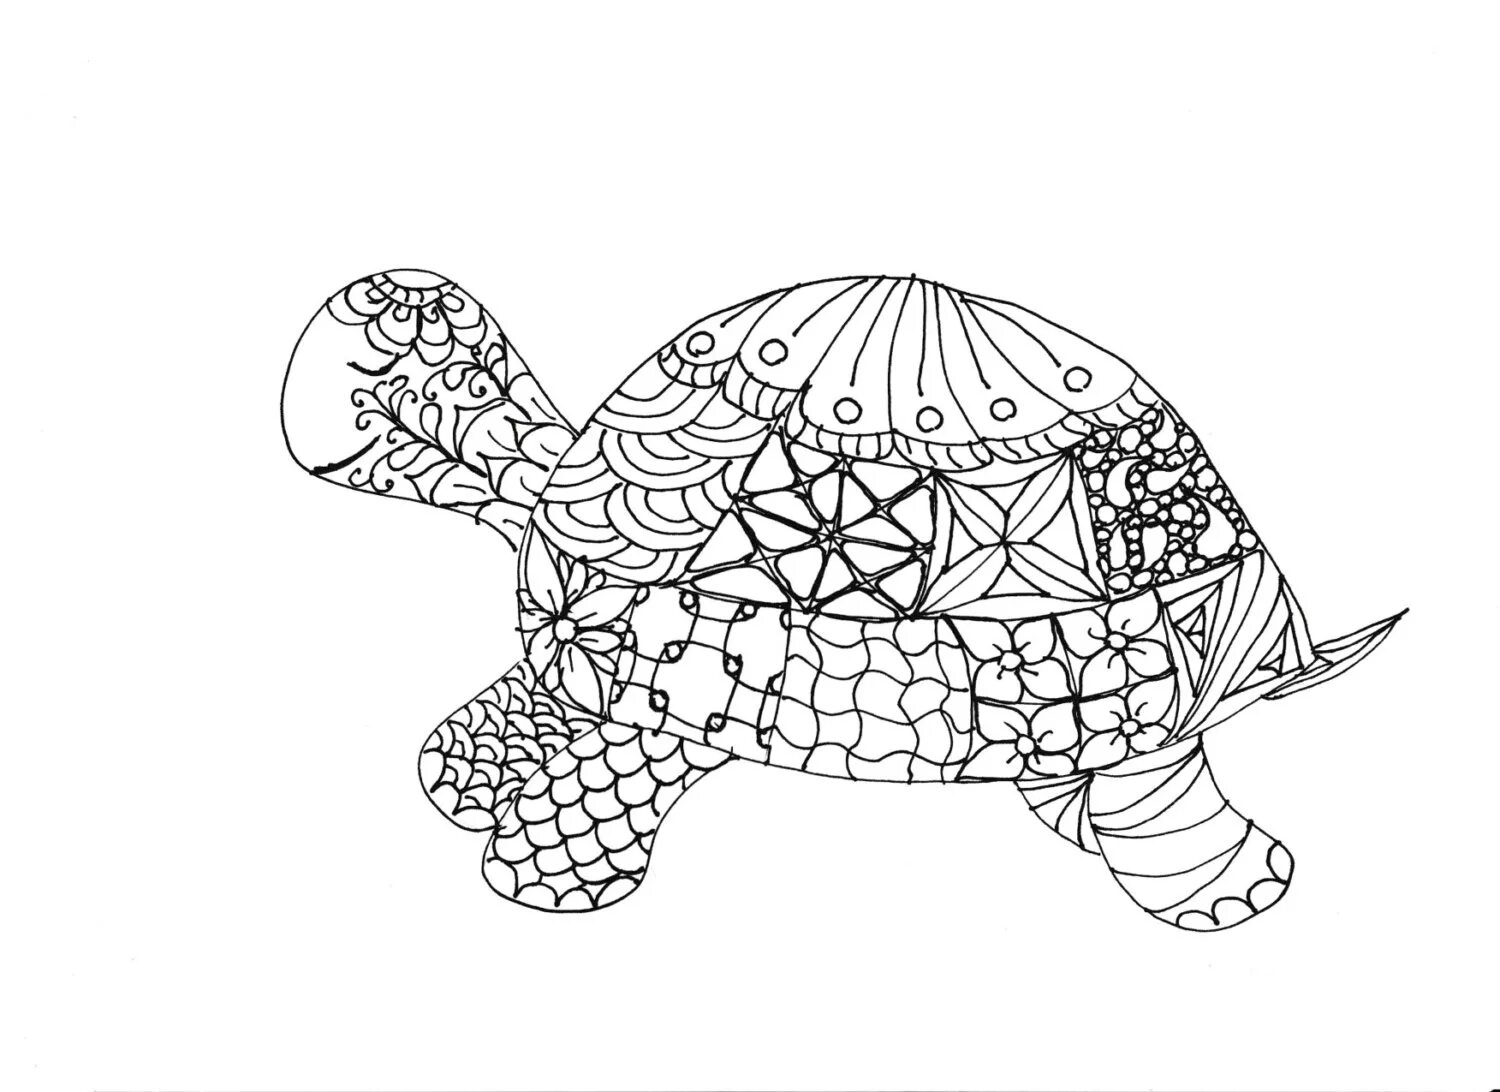 A fascinating anti-stress turtle coloring book